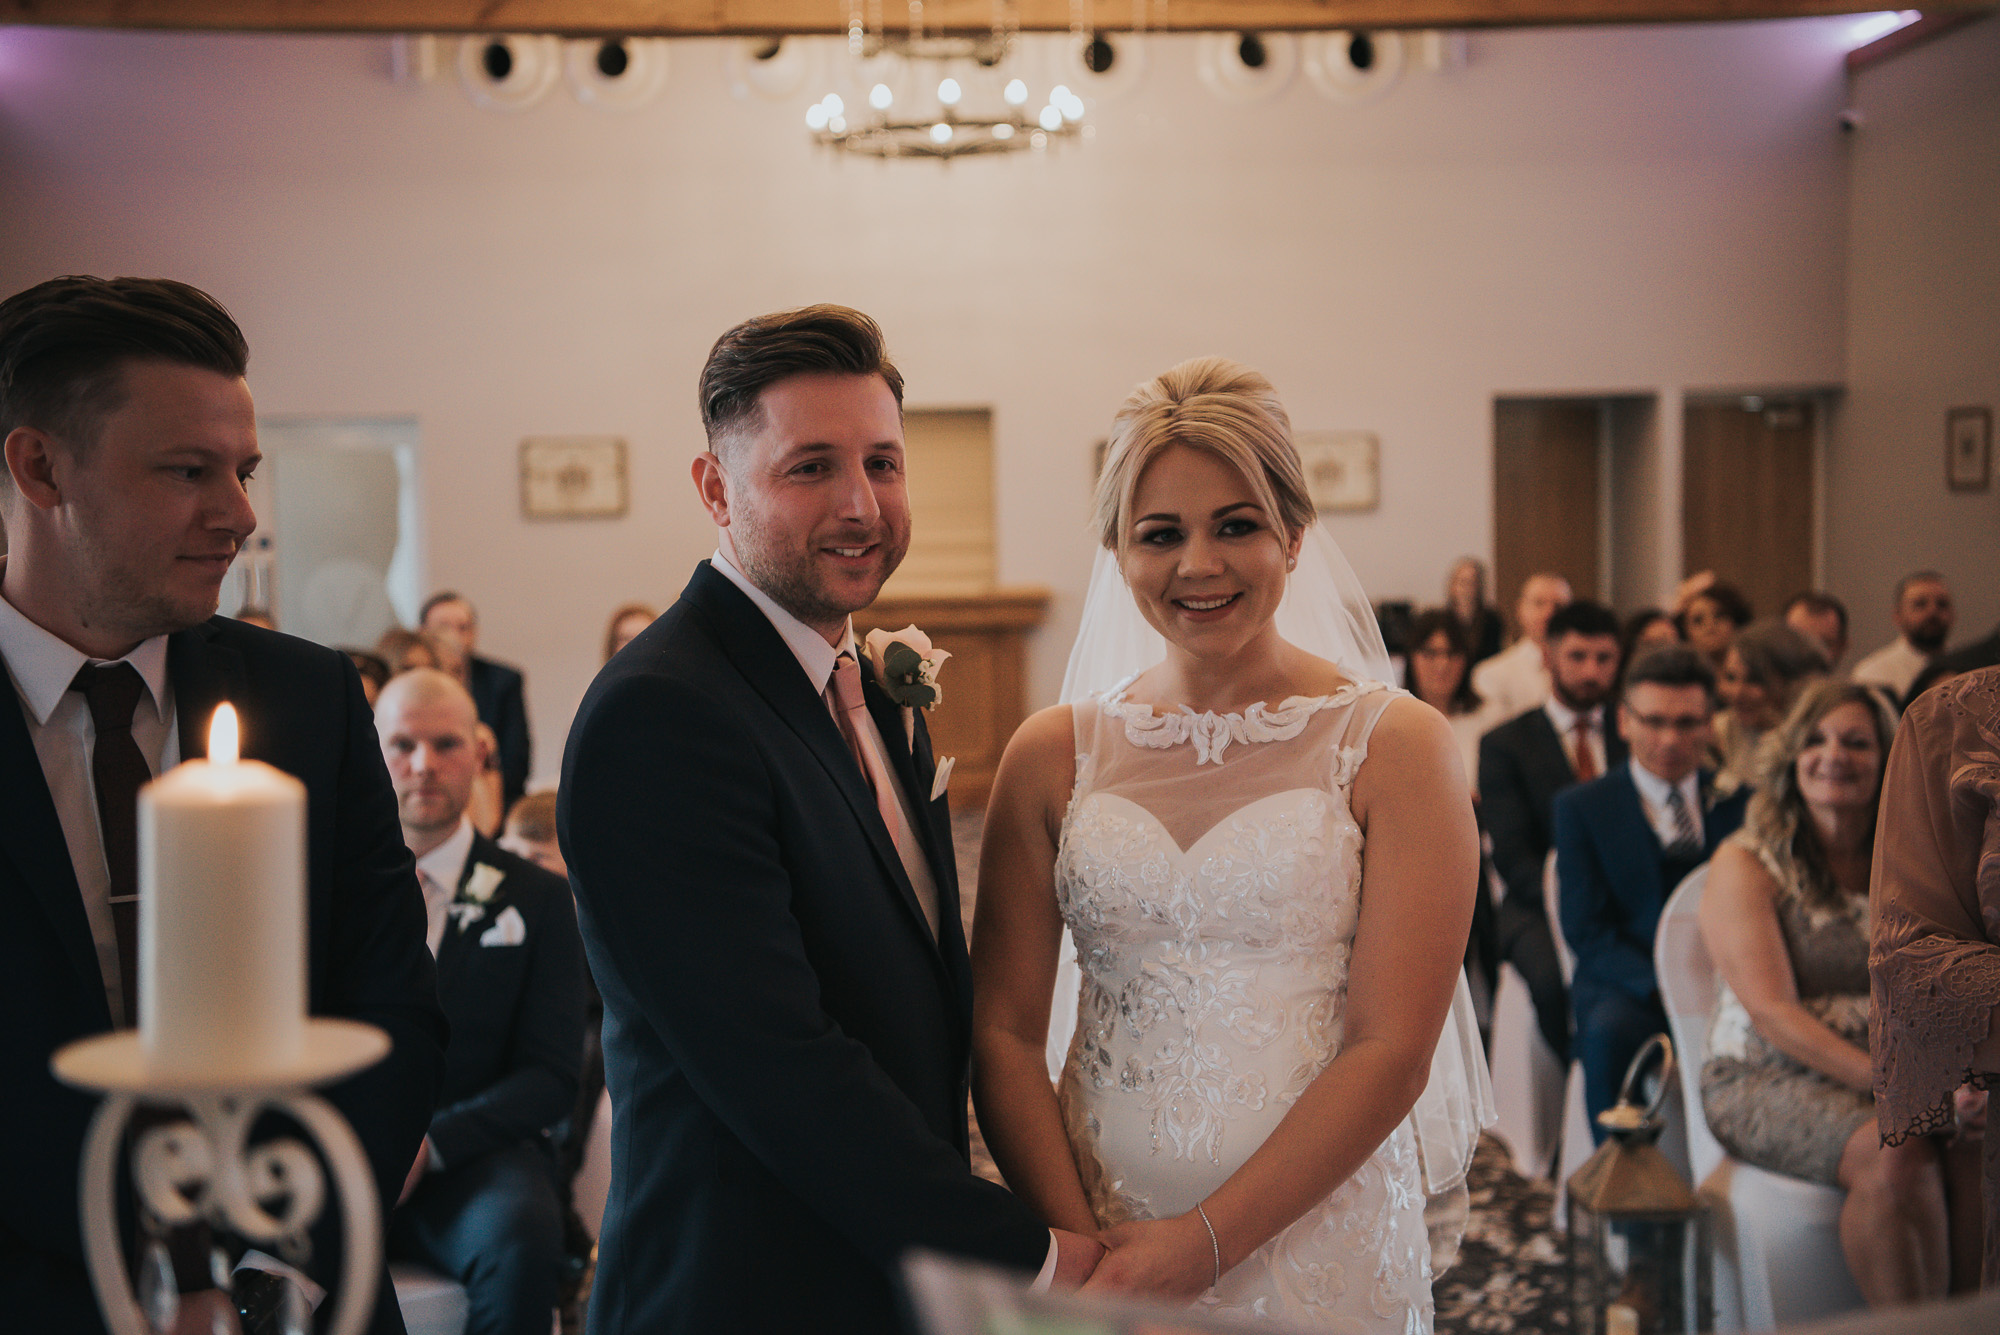 the happy couple tying the knot  at The Villa in Wrea Green